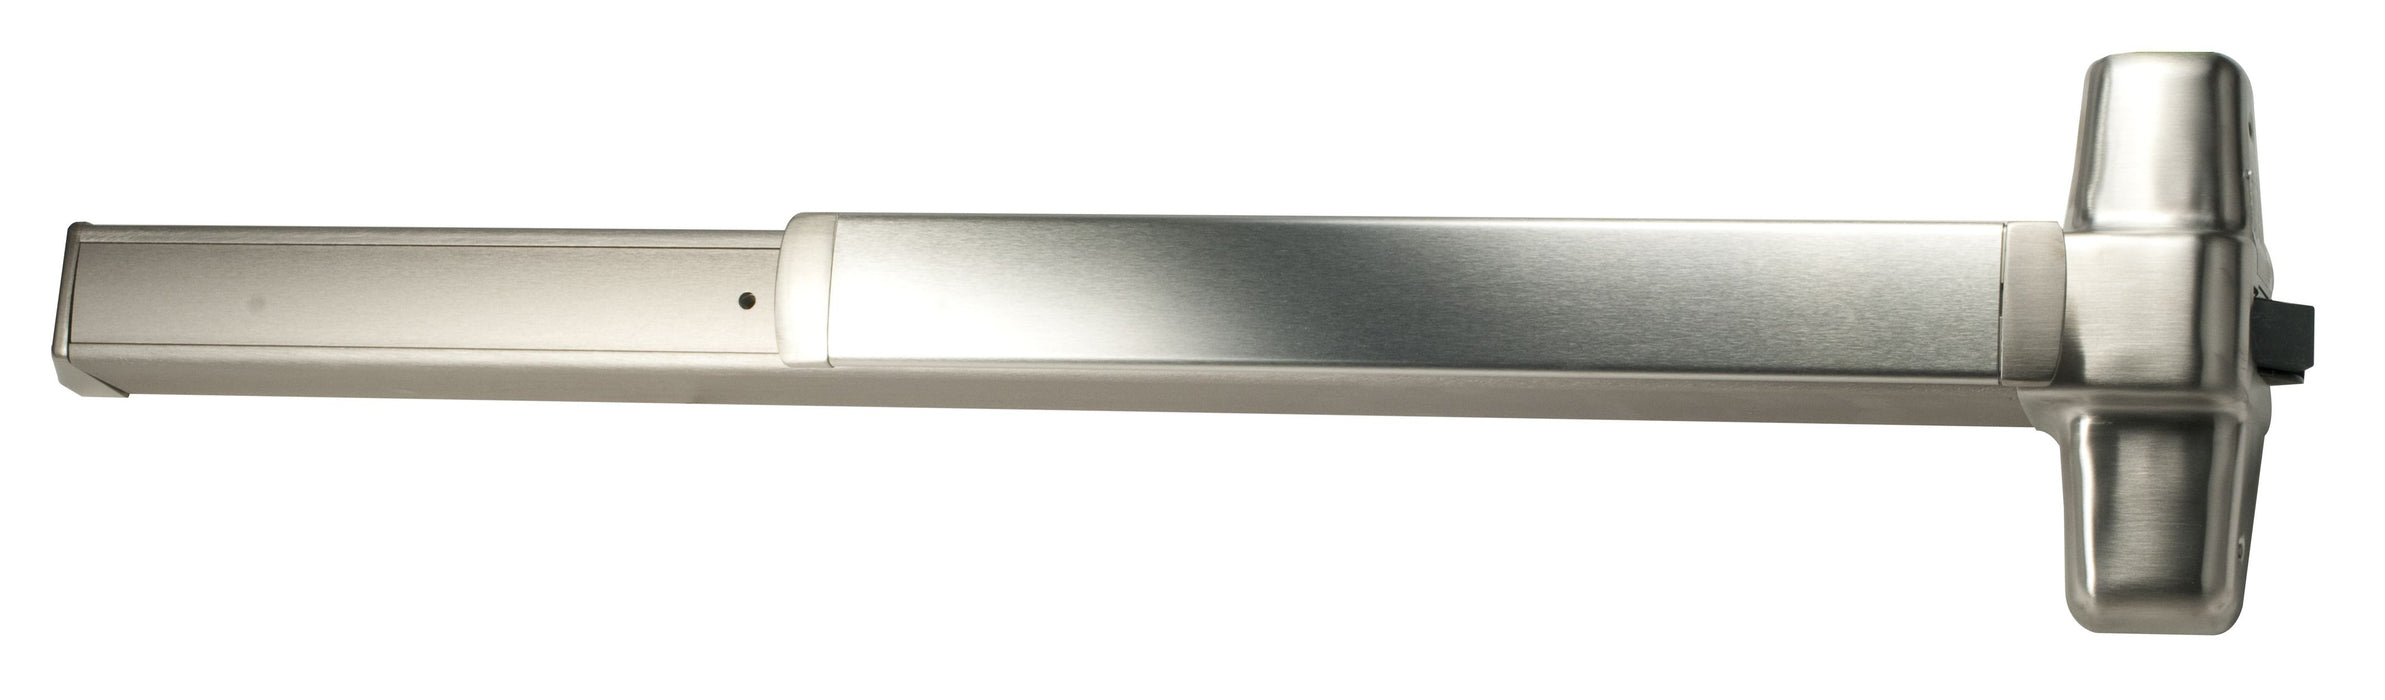 Rim Exit Device with Satin Stainless Steel Finish